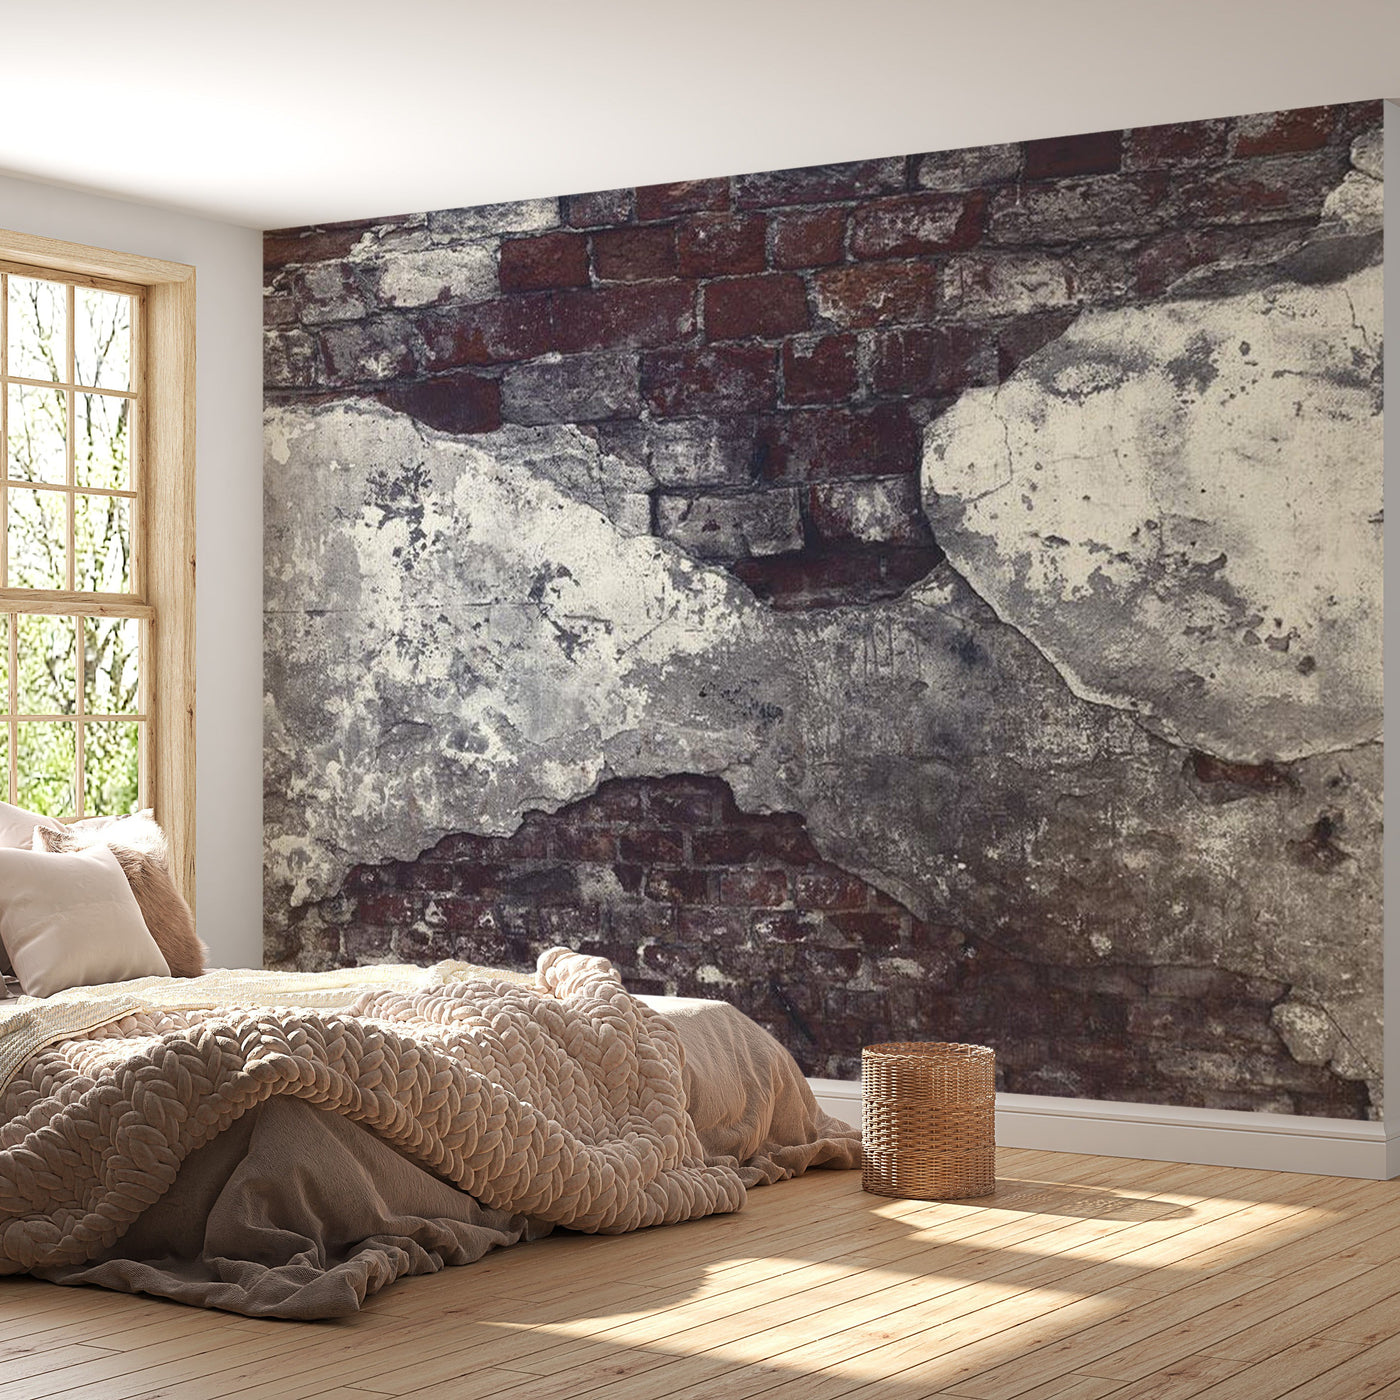 Peel & Stick Wall Mural - Dark Old Brick Wall - Removable Wall Decals